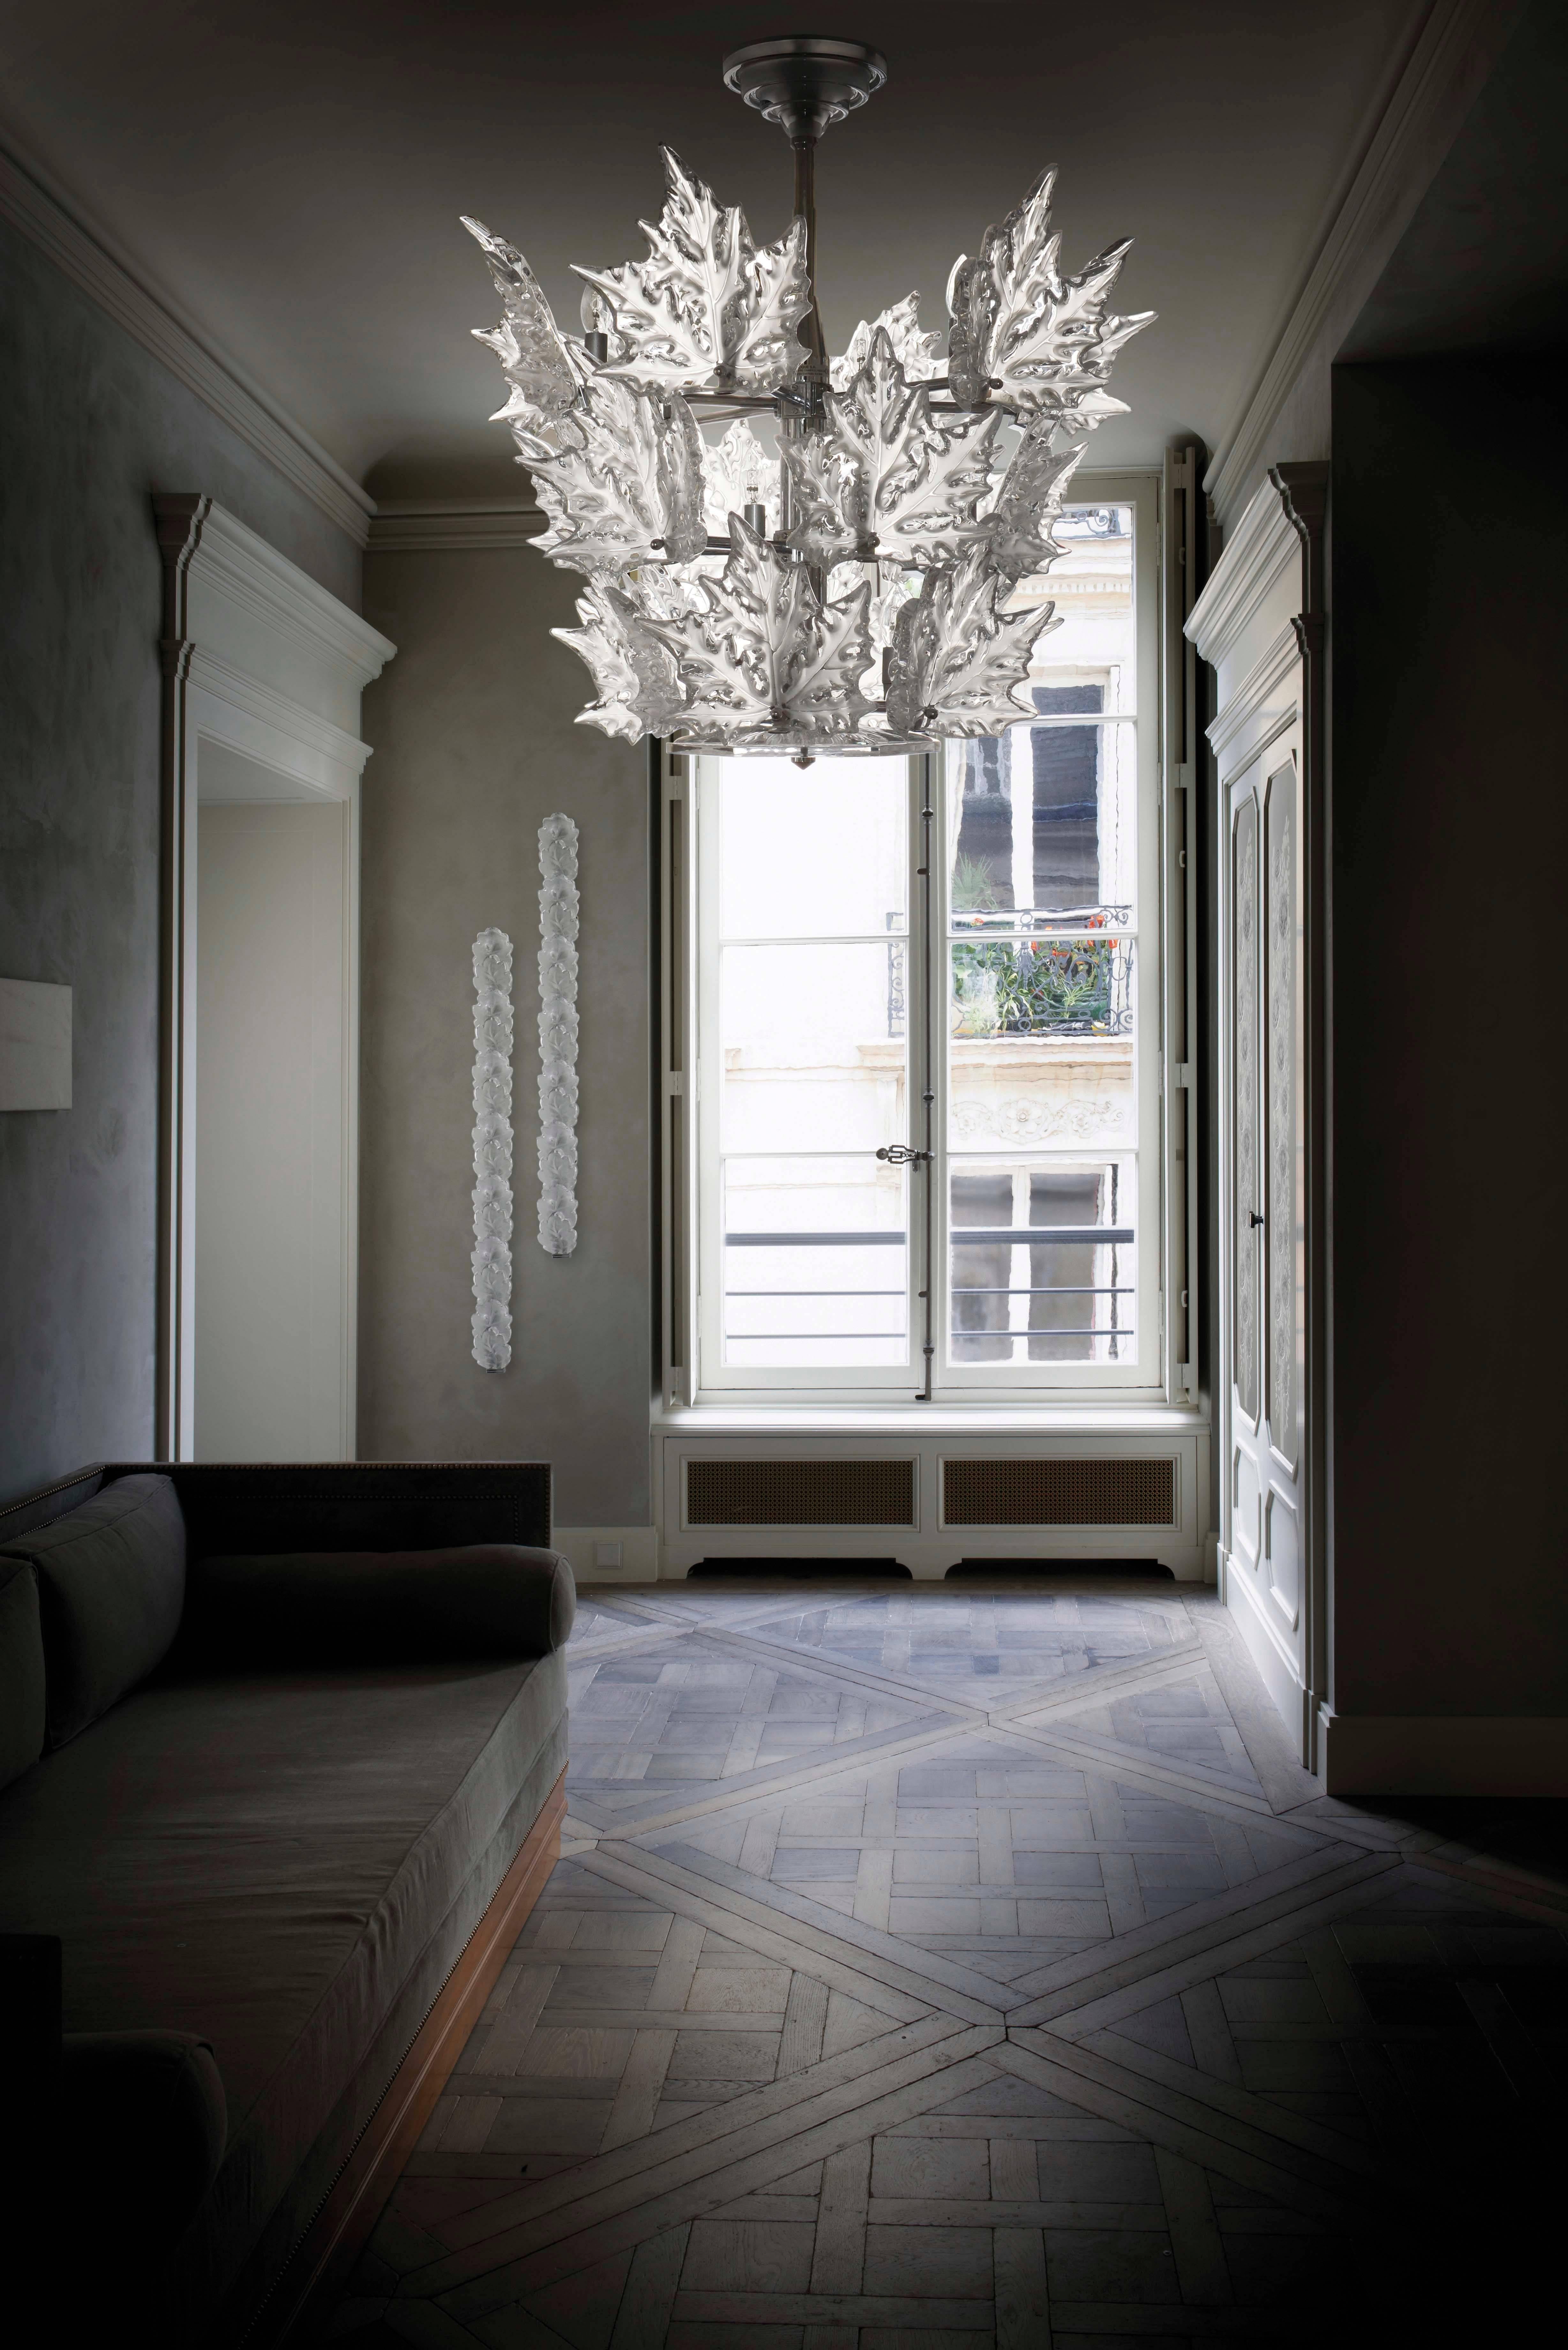 Created by Marc Lalique in 1955, the Chêne Light Ramp harmoniously complements the collection of Lalique crystal chandeliers. It consists of two crown patterns of oak leaves in satin crystal repolished on the ridges. This wall sconce is part of the